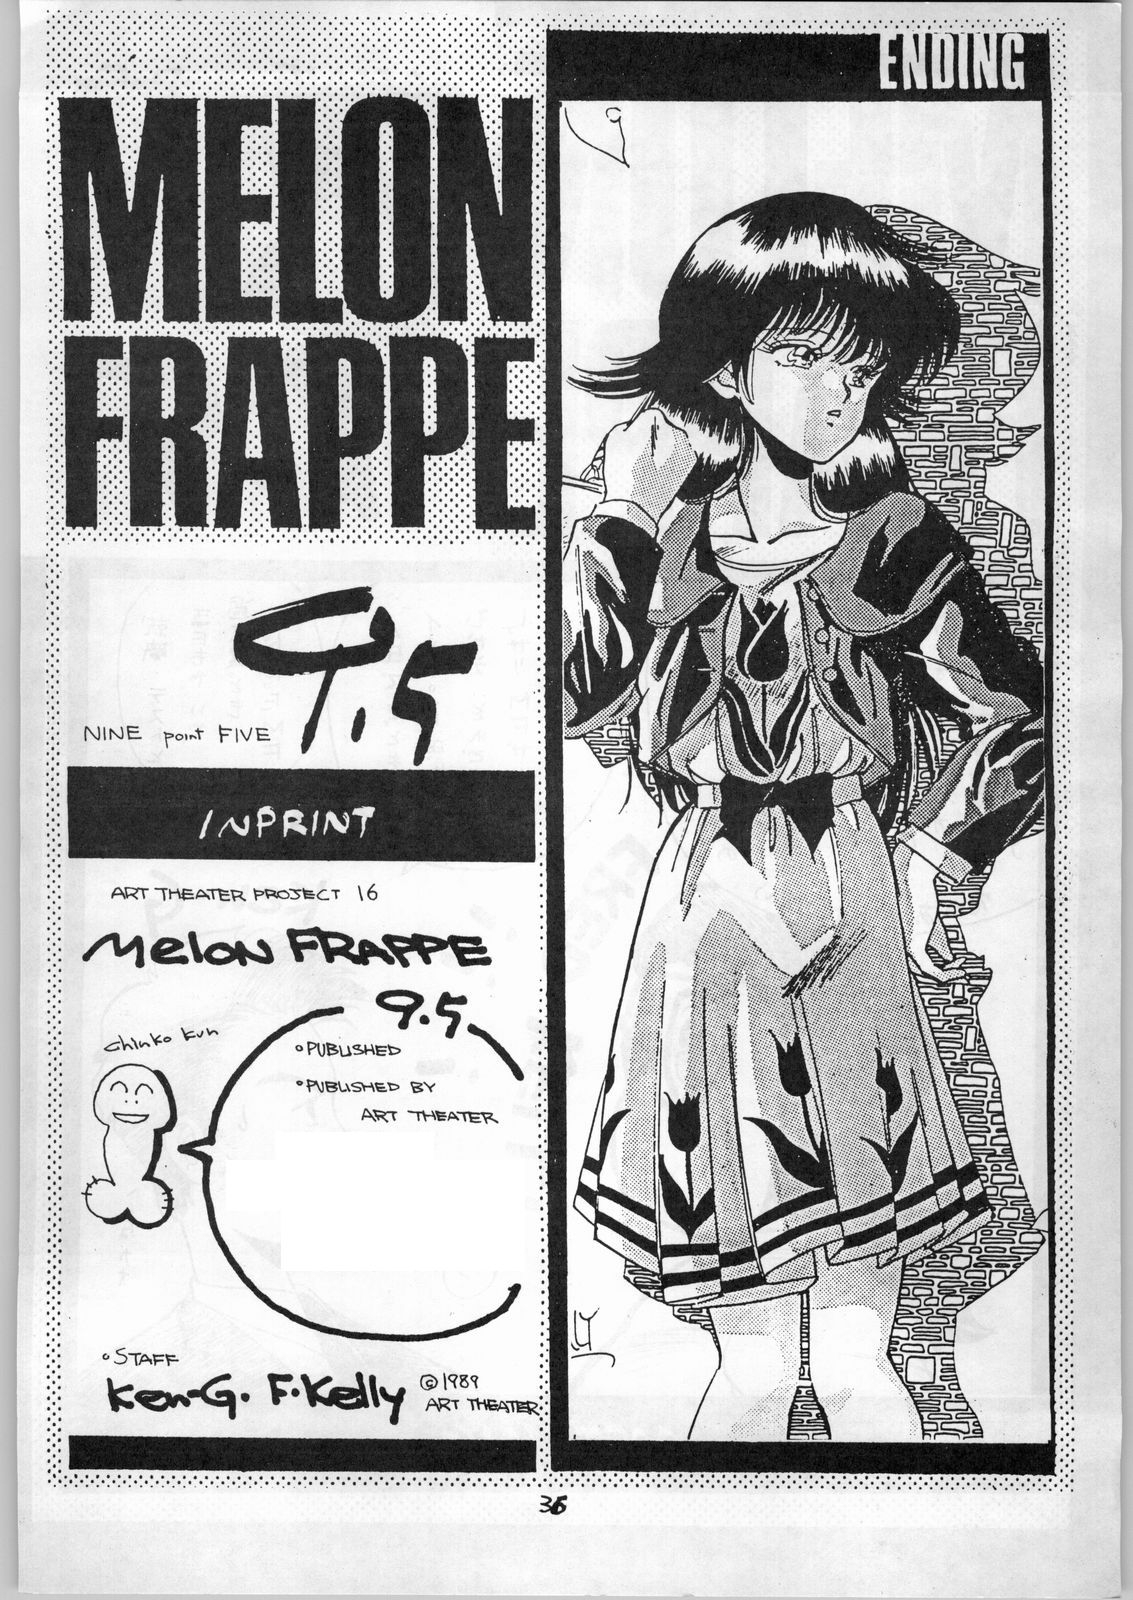 [ART=THEATER (Fred Kelly, Ken-G.)] MELON FRAPPE 9.5 (Various) 34